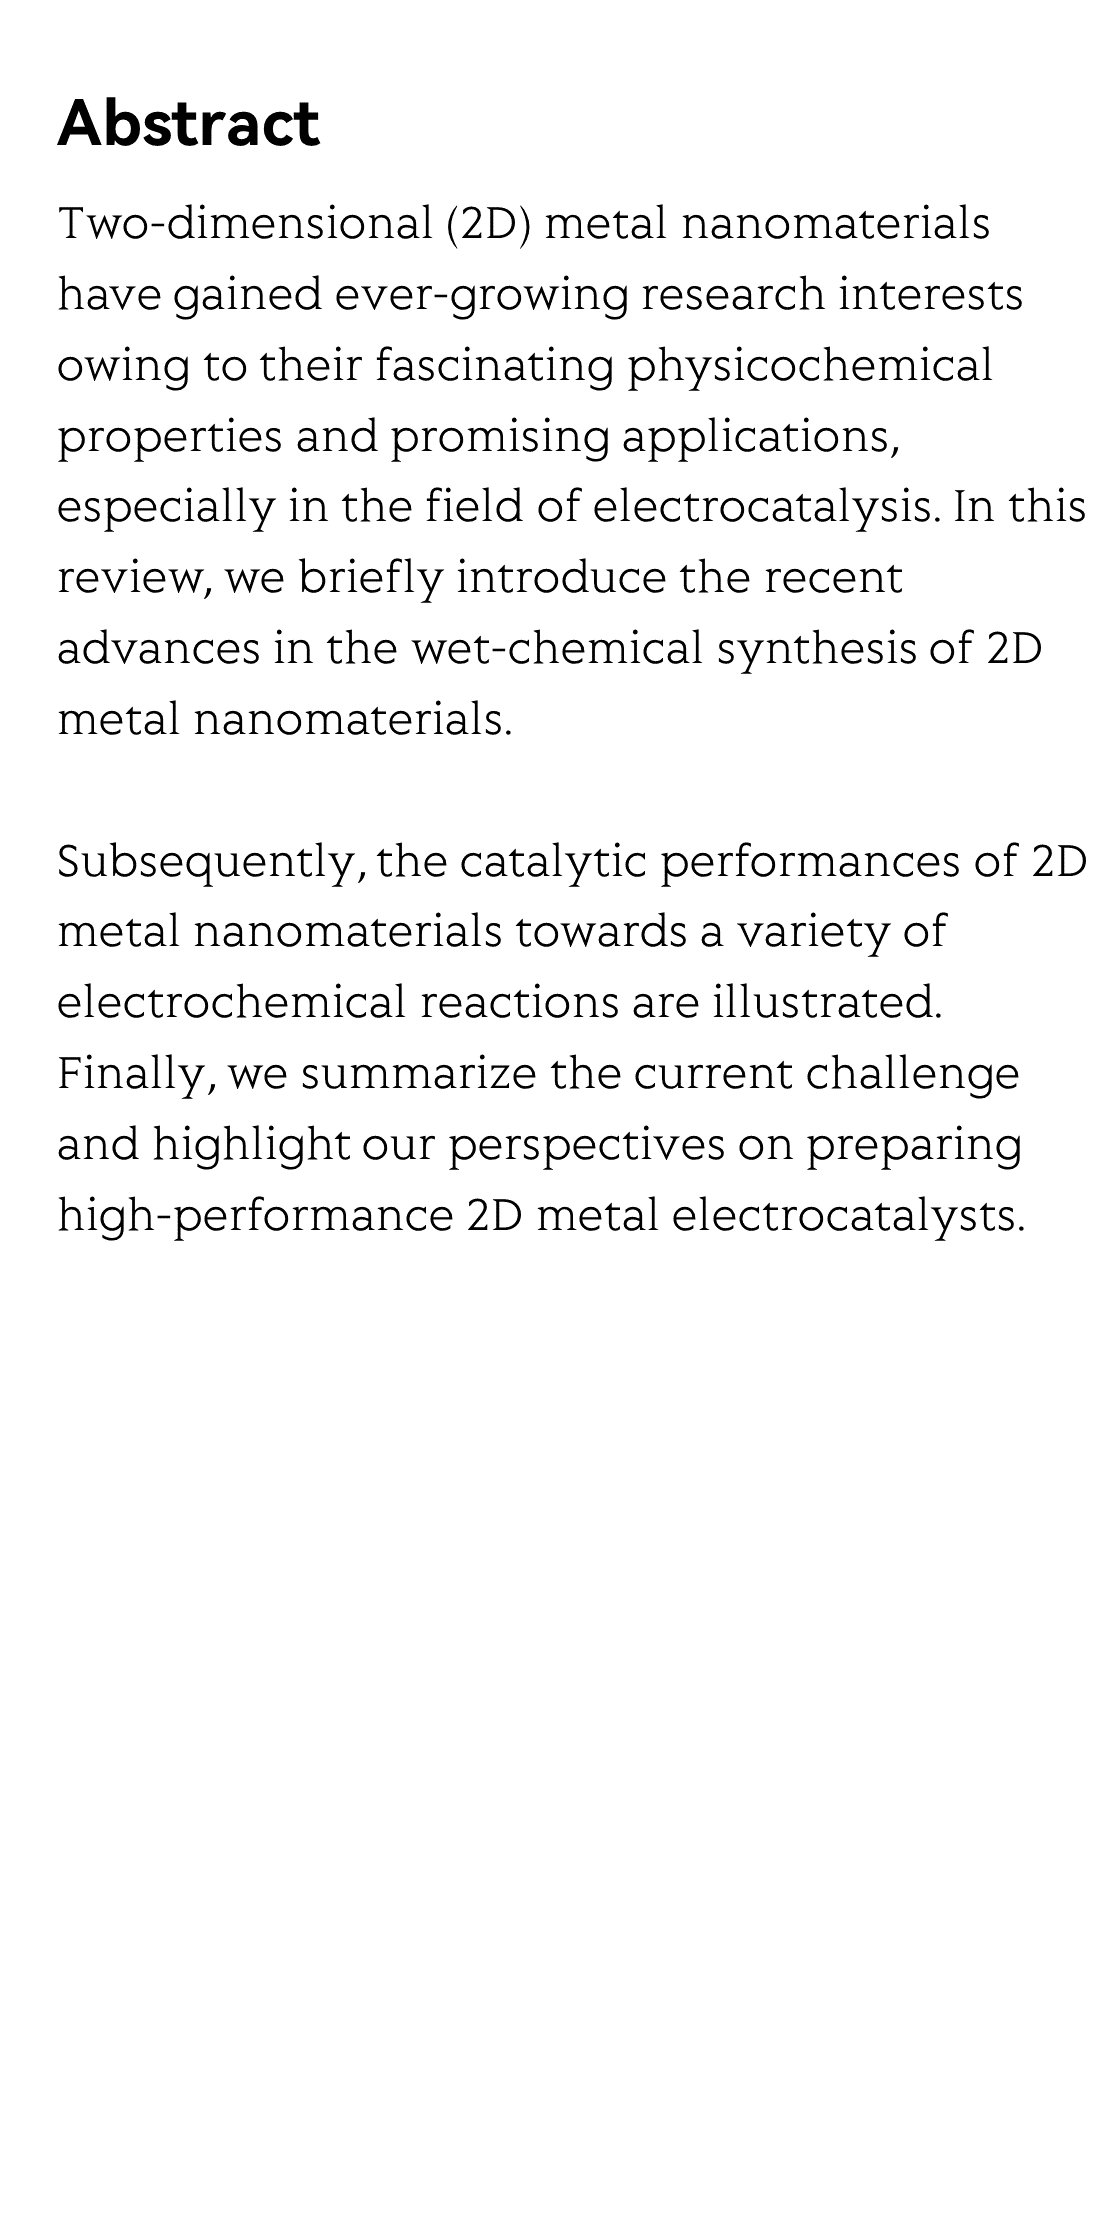 Wet-chemical synthesis of two-dimensional metal nanomaterials for electrocatalysis_2